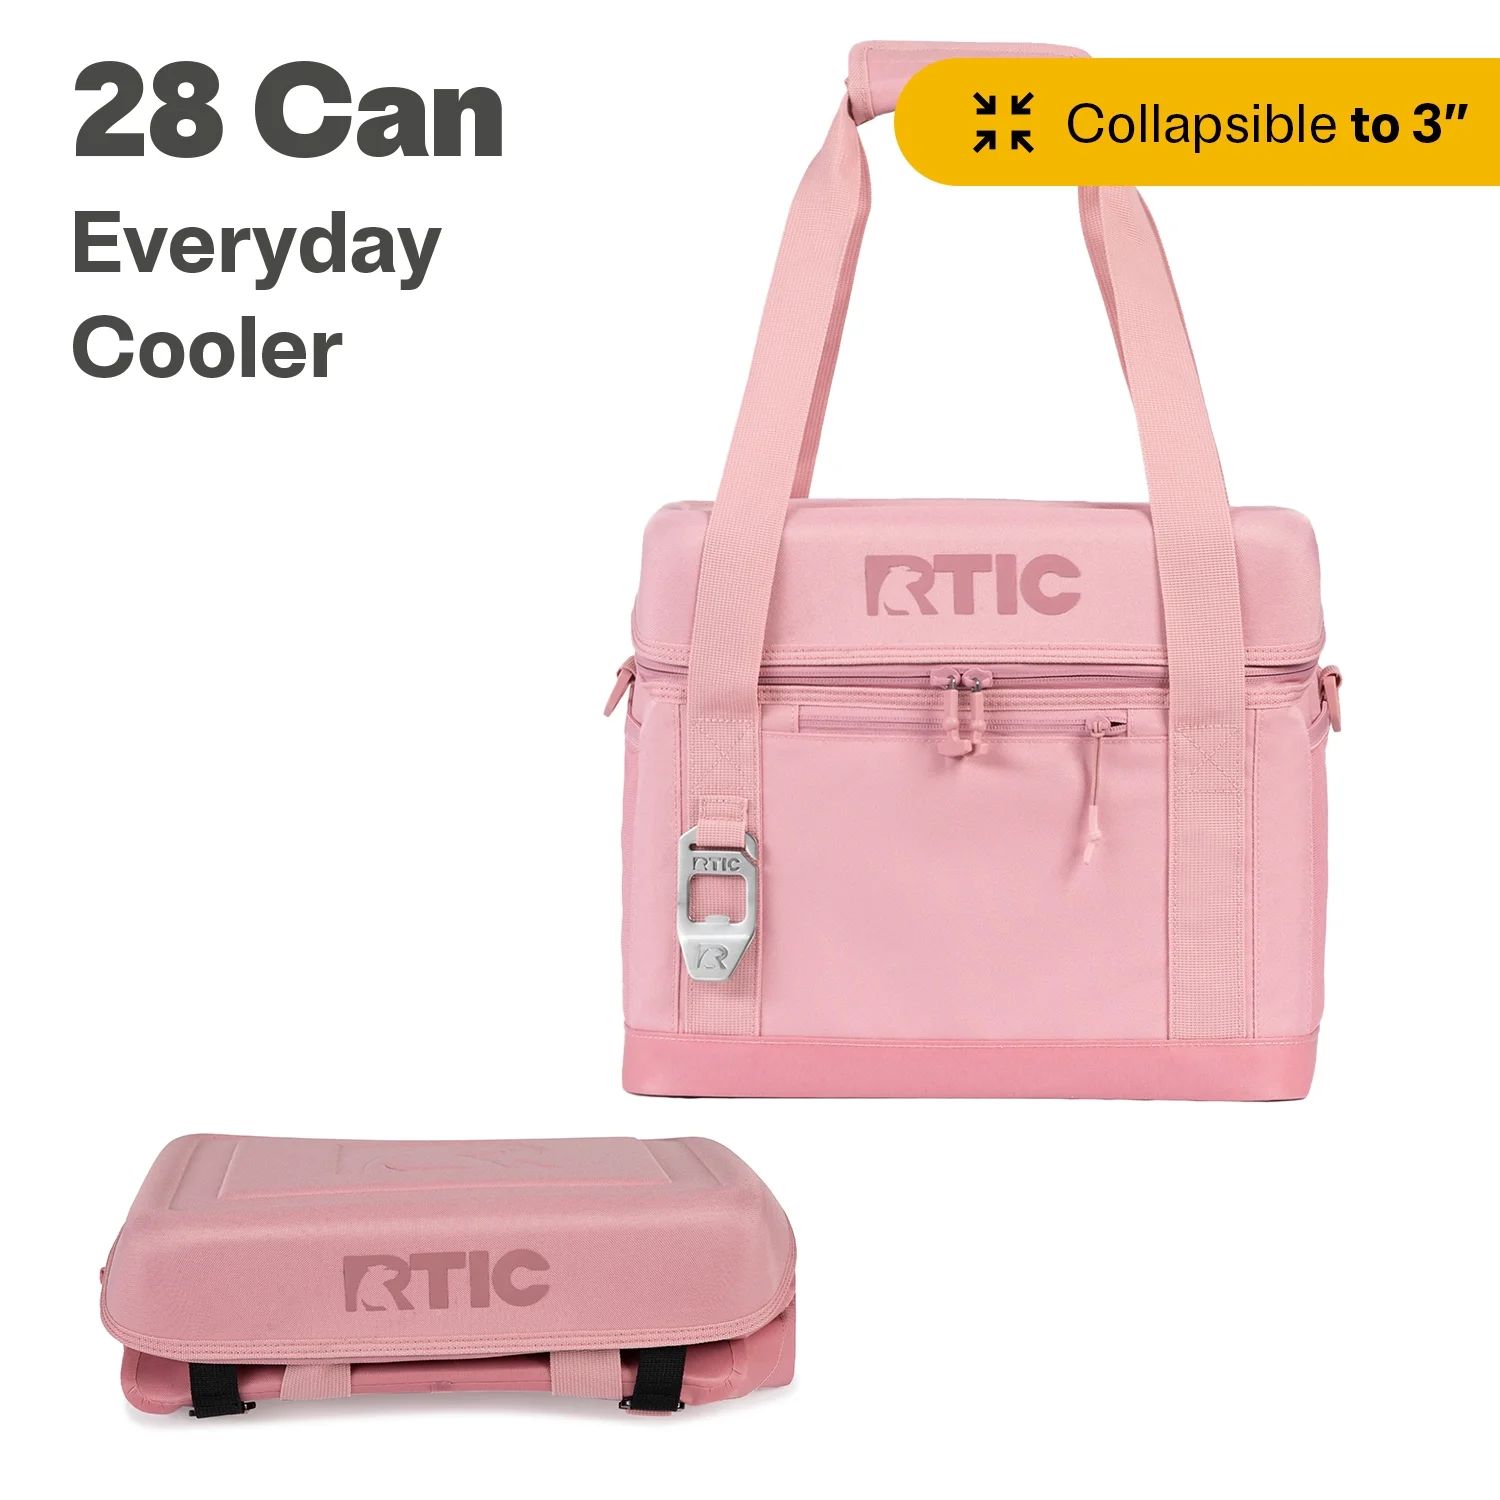 RTIC 28 Can Everyday Cooler, Insulated Soft Cooler with Collapsible Design, Dusty Rose | Walmart (US)